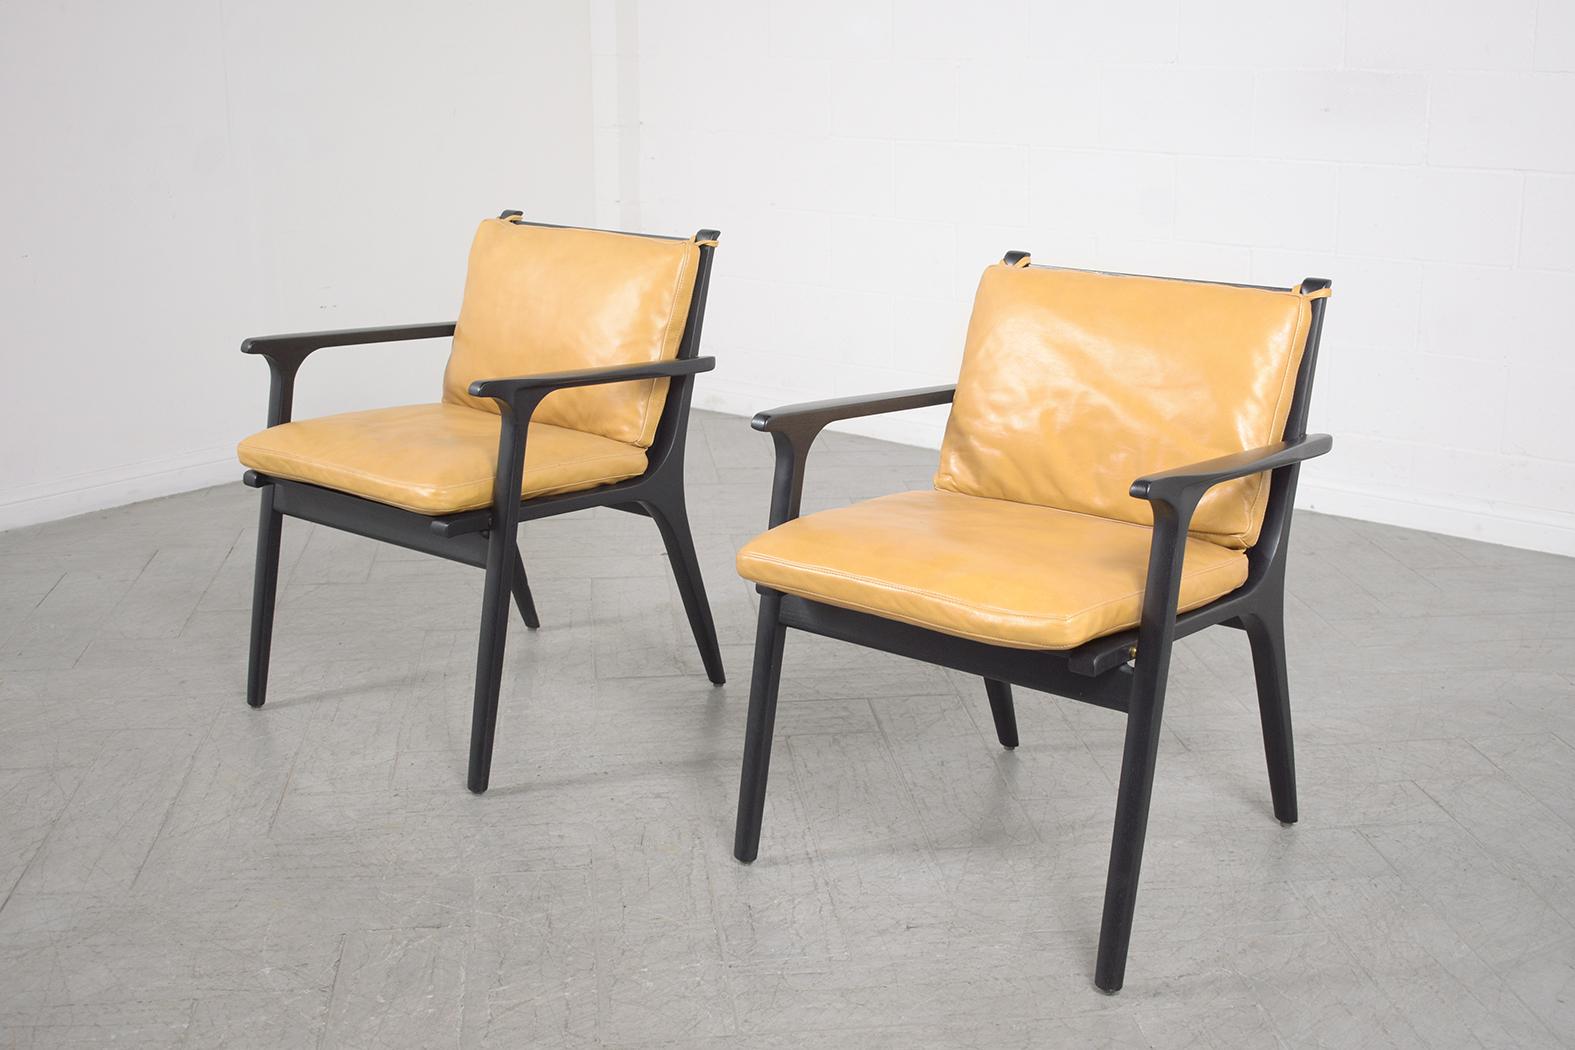 American Modern Leather Armchairs: Mustard Yellow Upholstery with Black Oak Frame For Sale